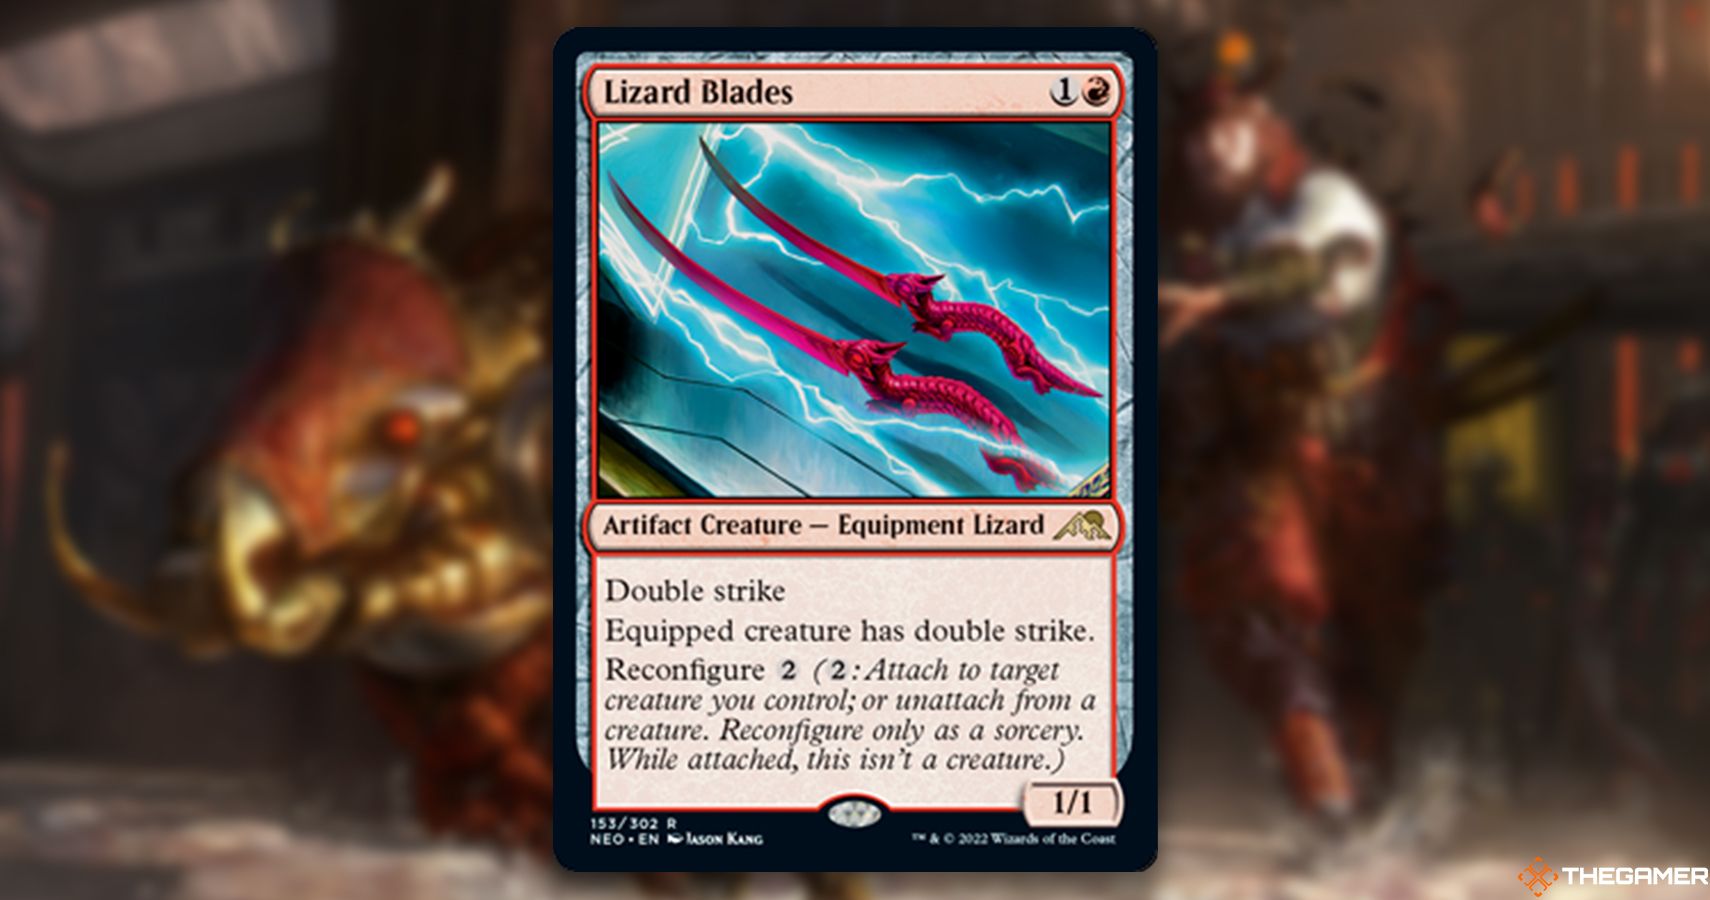 Image of Lizard Blades card from Magic: The Gathering, featuring art by Jason Kang